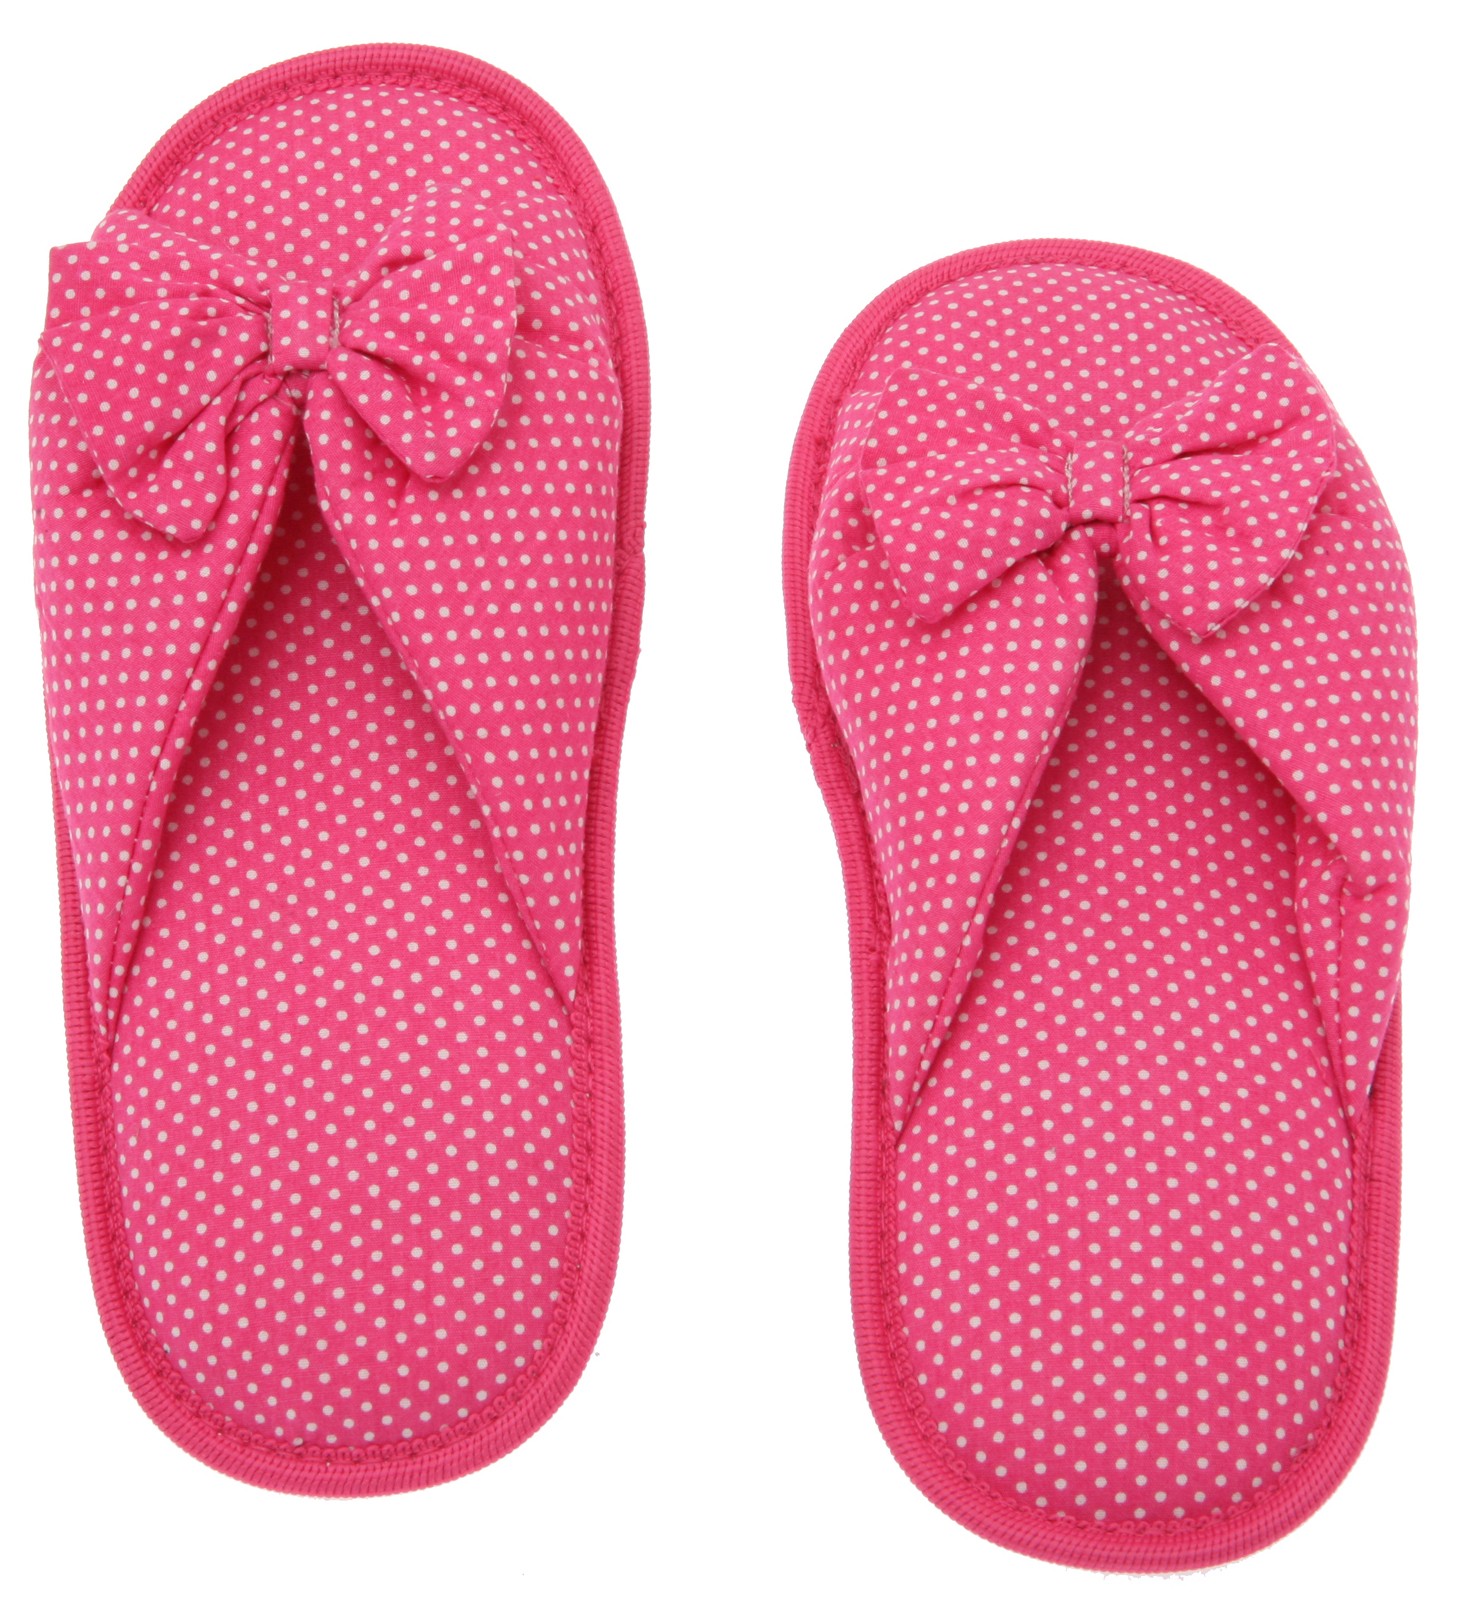 Hot Pink Dots Printed Cotton Women Slipper with